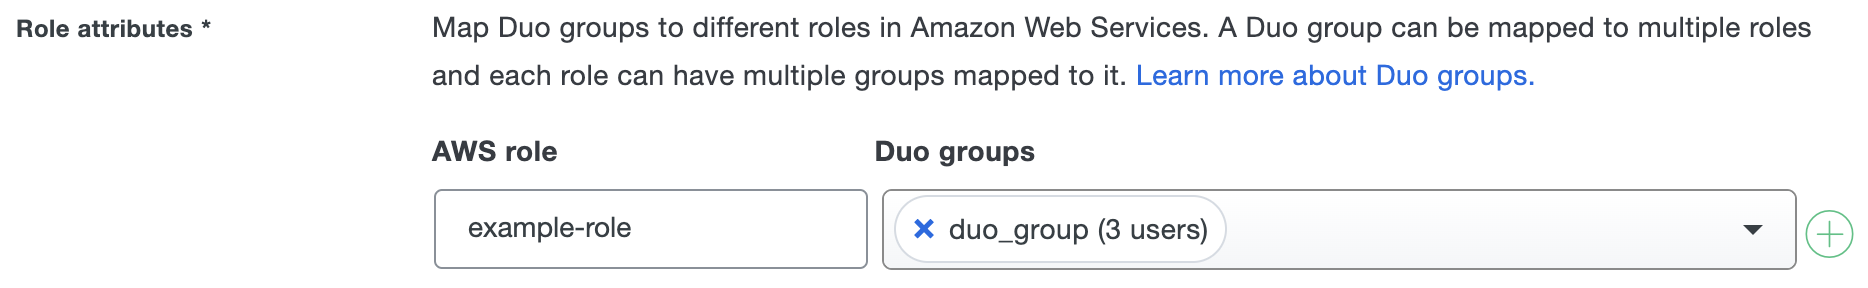 Duo Amazon AppStream 2.0 Role Attributes Fields